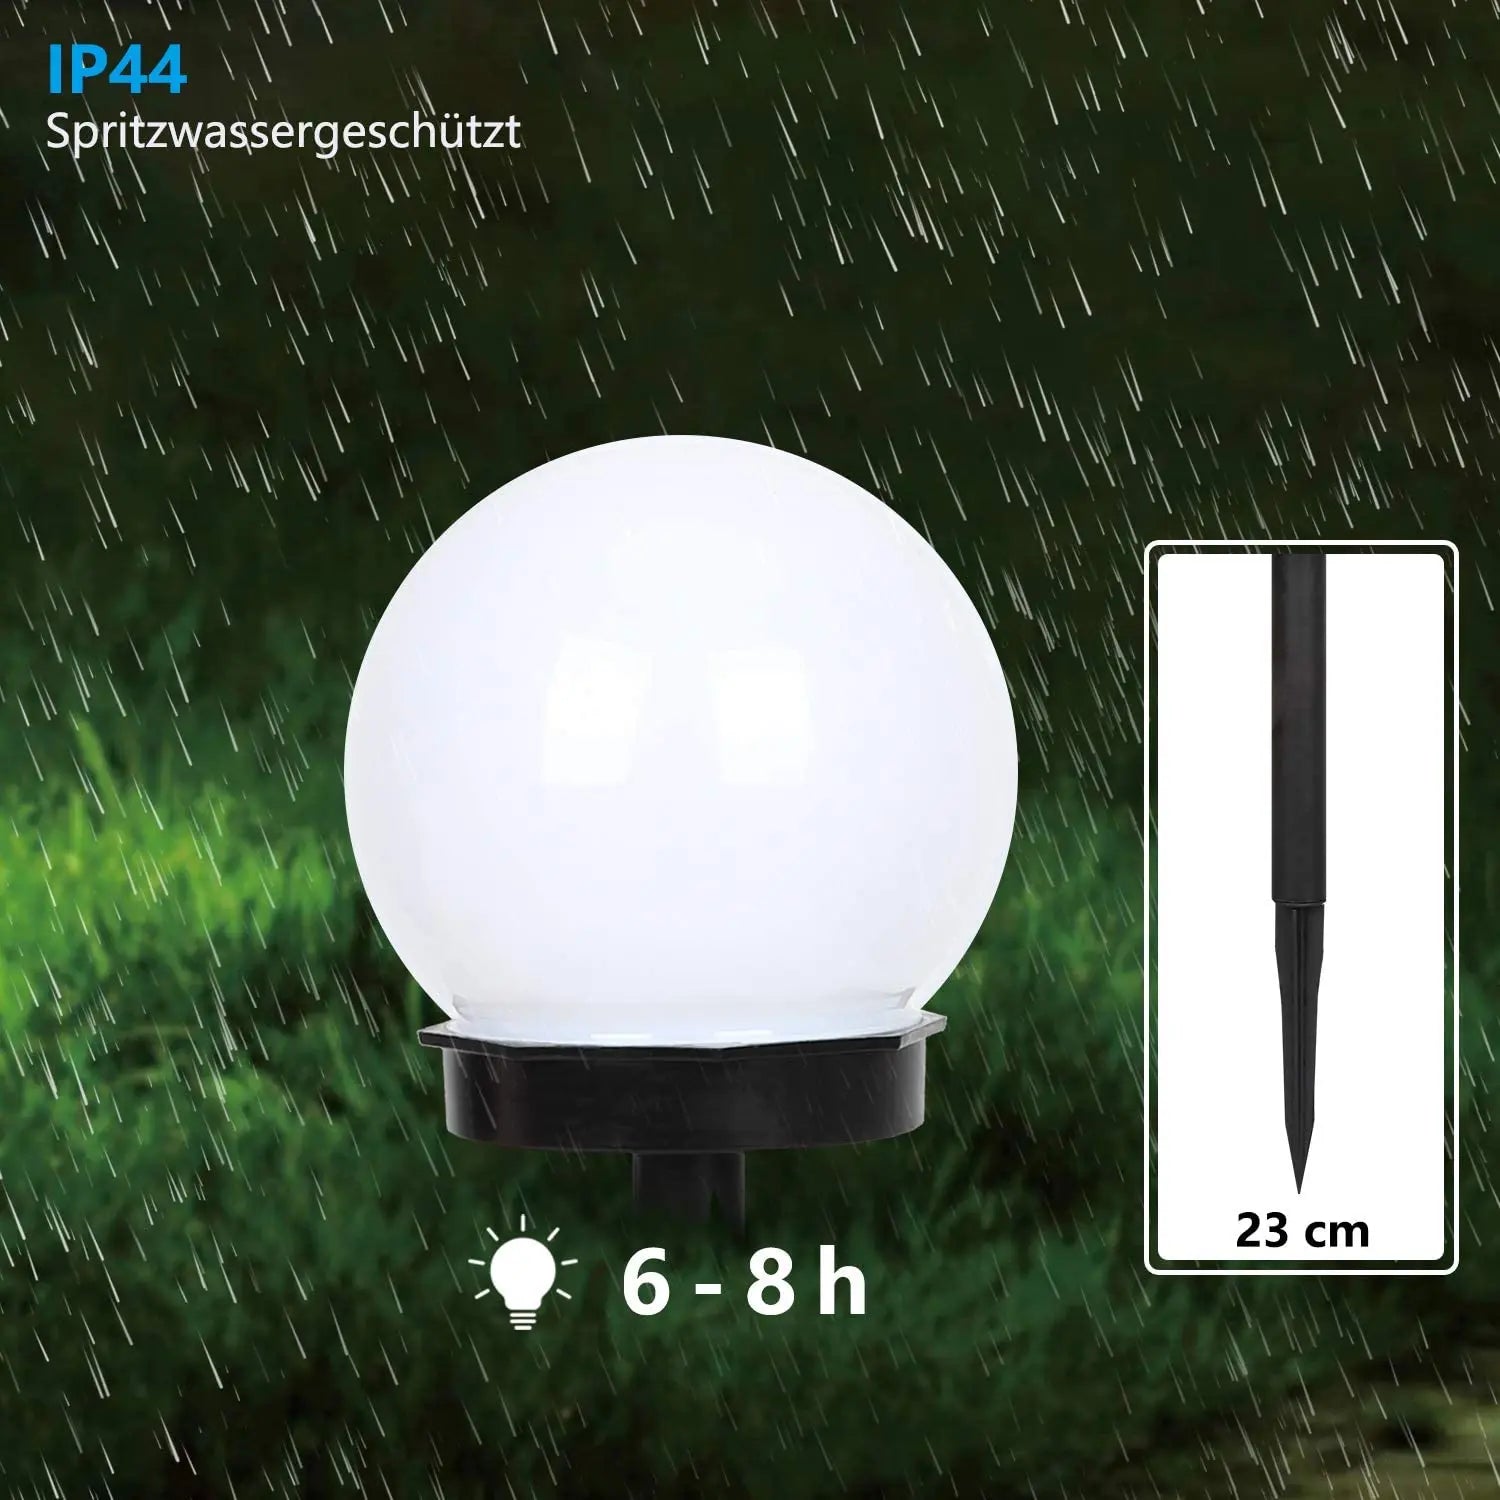 2/4/8pcs LED Solar Garden Light, Water-resistant and suitable for outdoor use, this device can withstand up to 8 hours of sunlight.